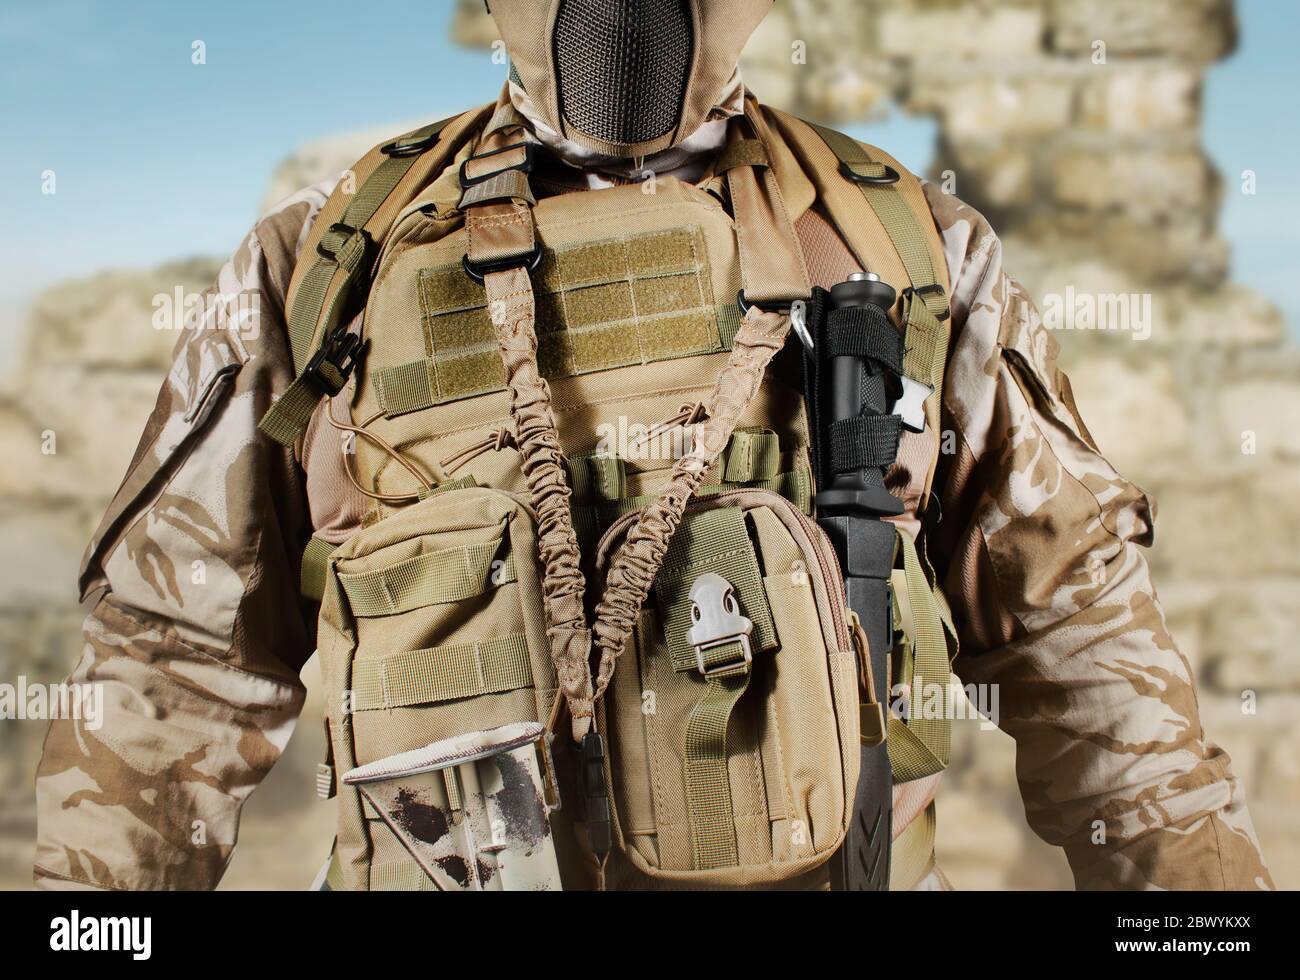 Photo of a fully equipped soldier in uniform, armor, helmet and mask  standing in desert battlefield background close-up view Stock Photo - Alamy